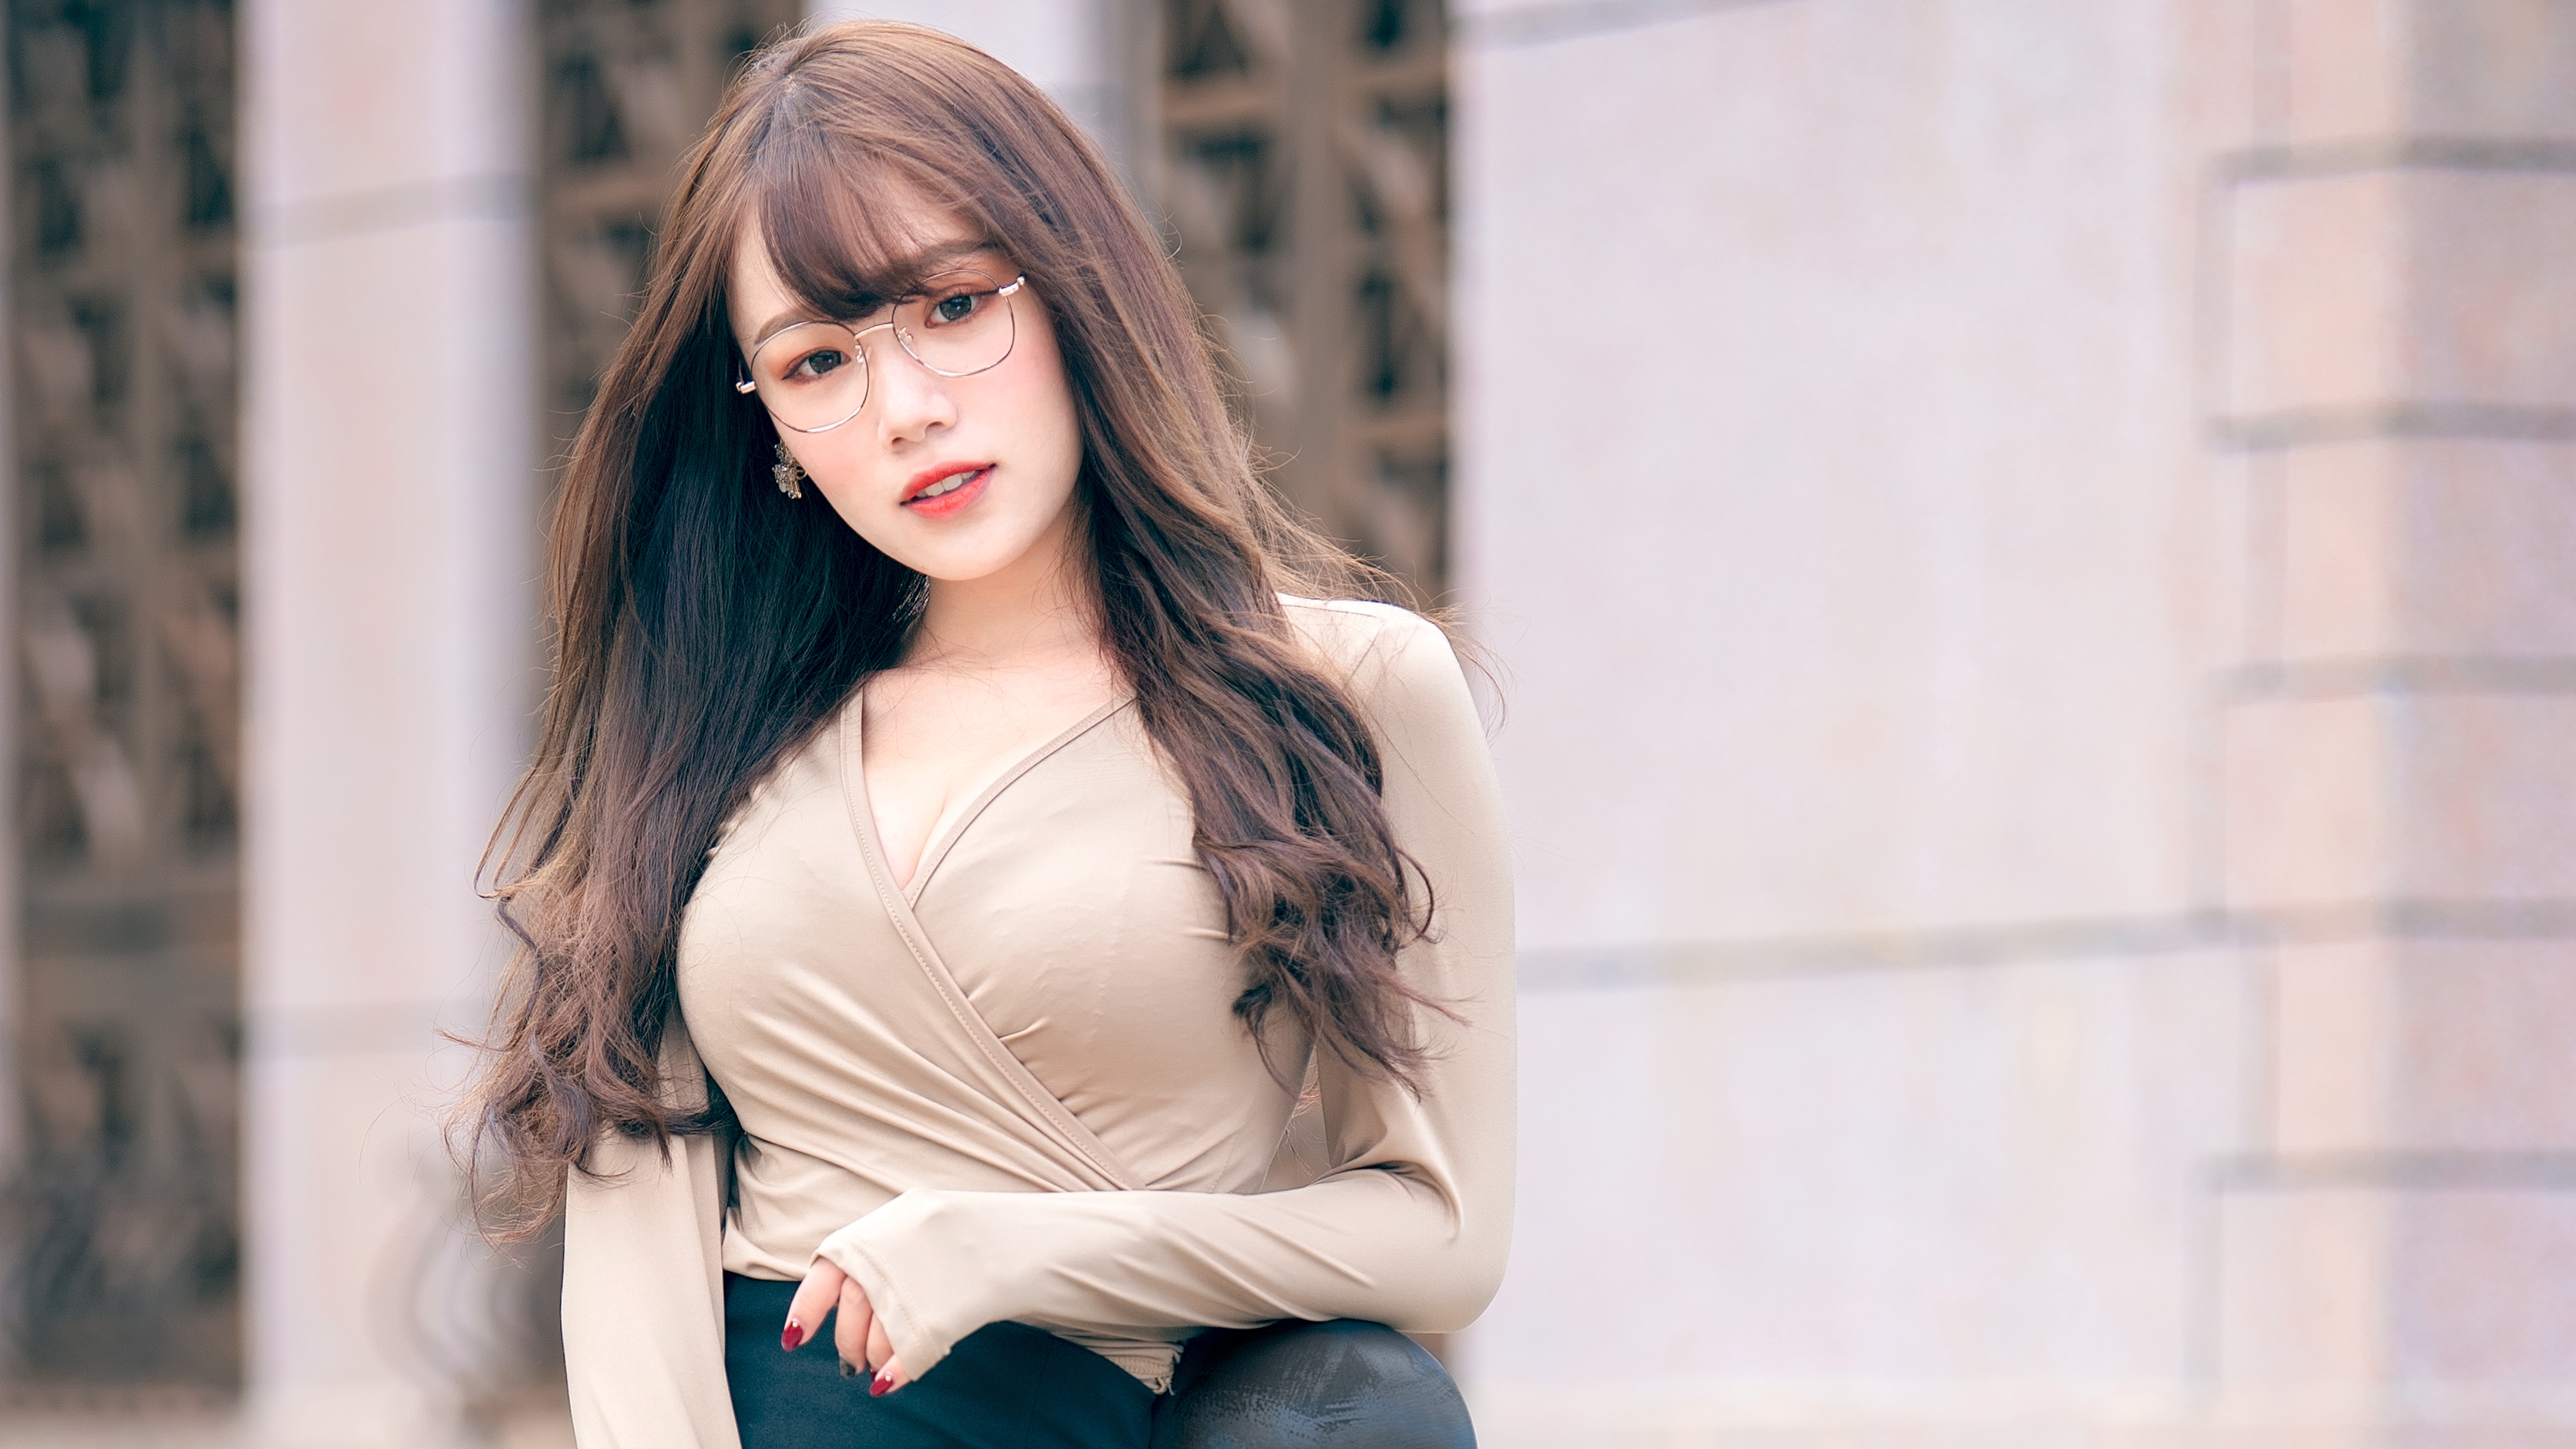 Linnnng Women Model Asian Brunette Bangs Women With Glasses Looking At Viewer Parted Lips Crop Top D 3344x1881